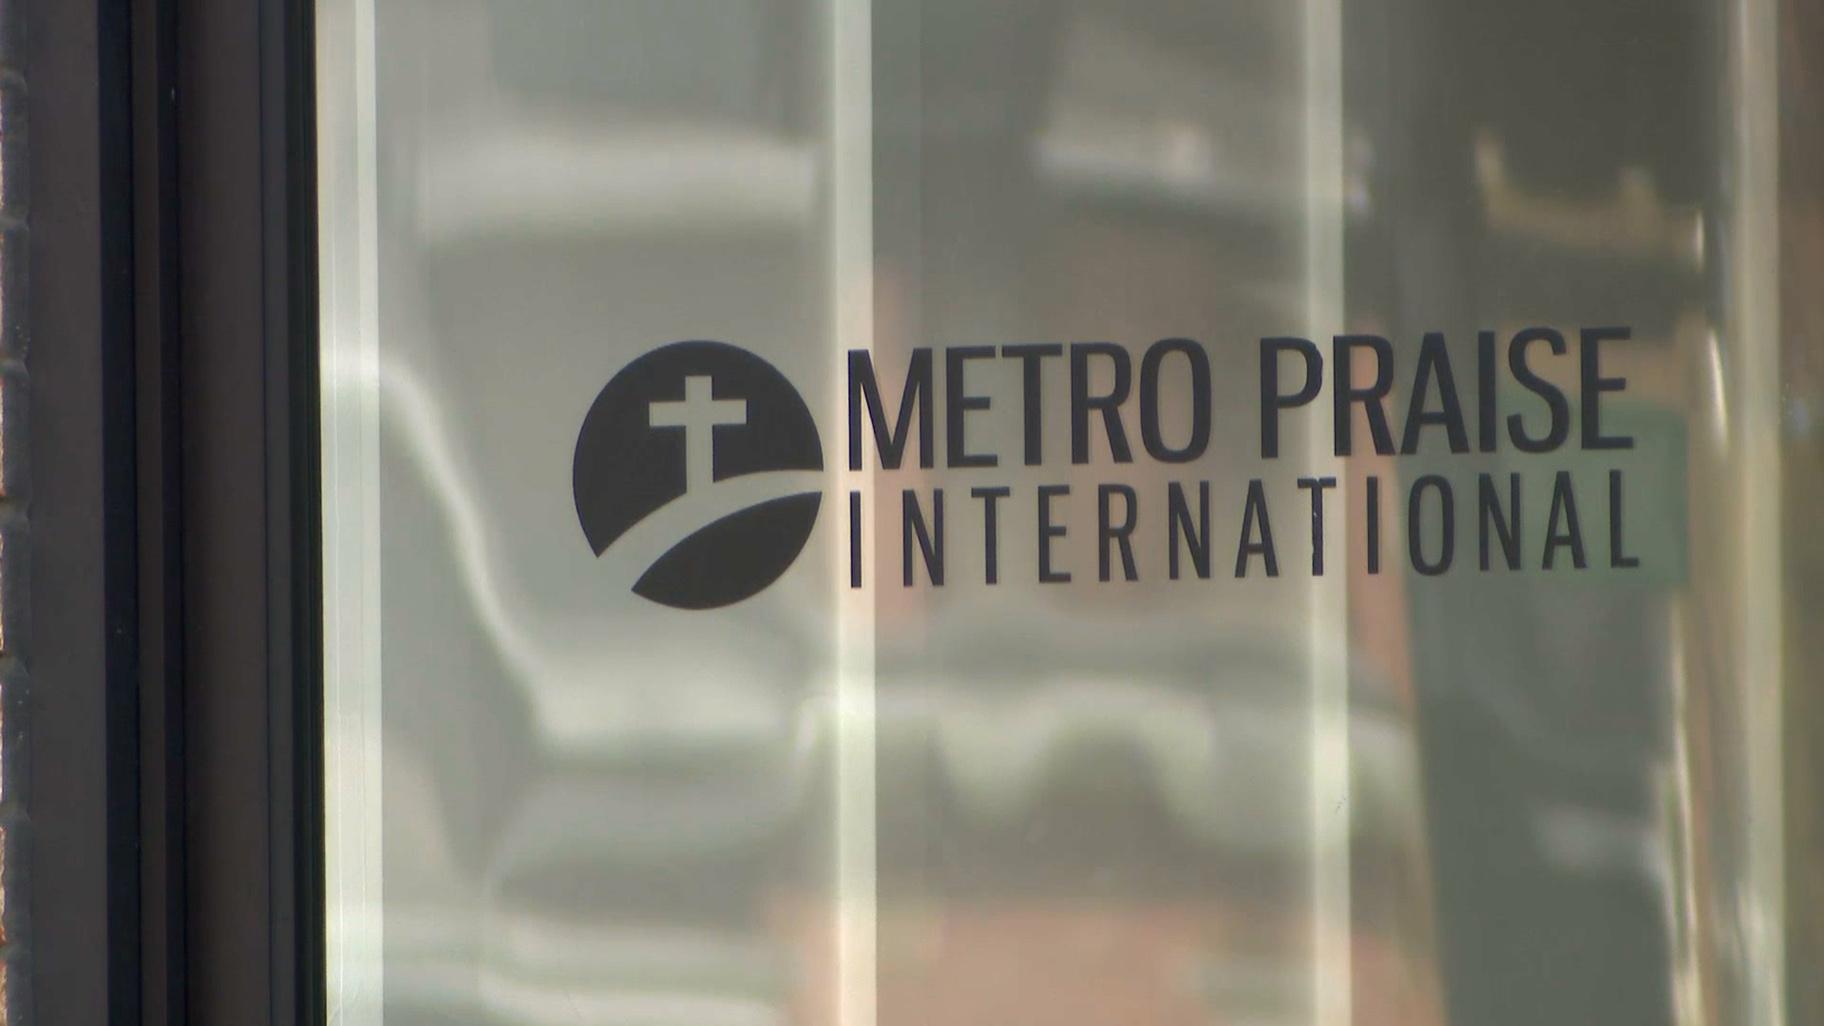 In May, Metro Praise International Church in Belmont Cragin defied the stay-at-home order that closed churches statewide. (WTTW News)